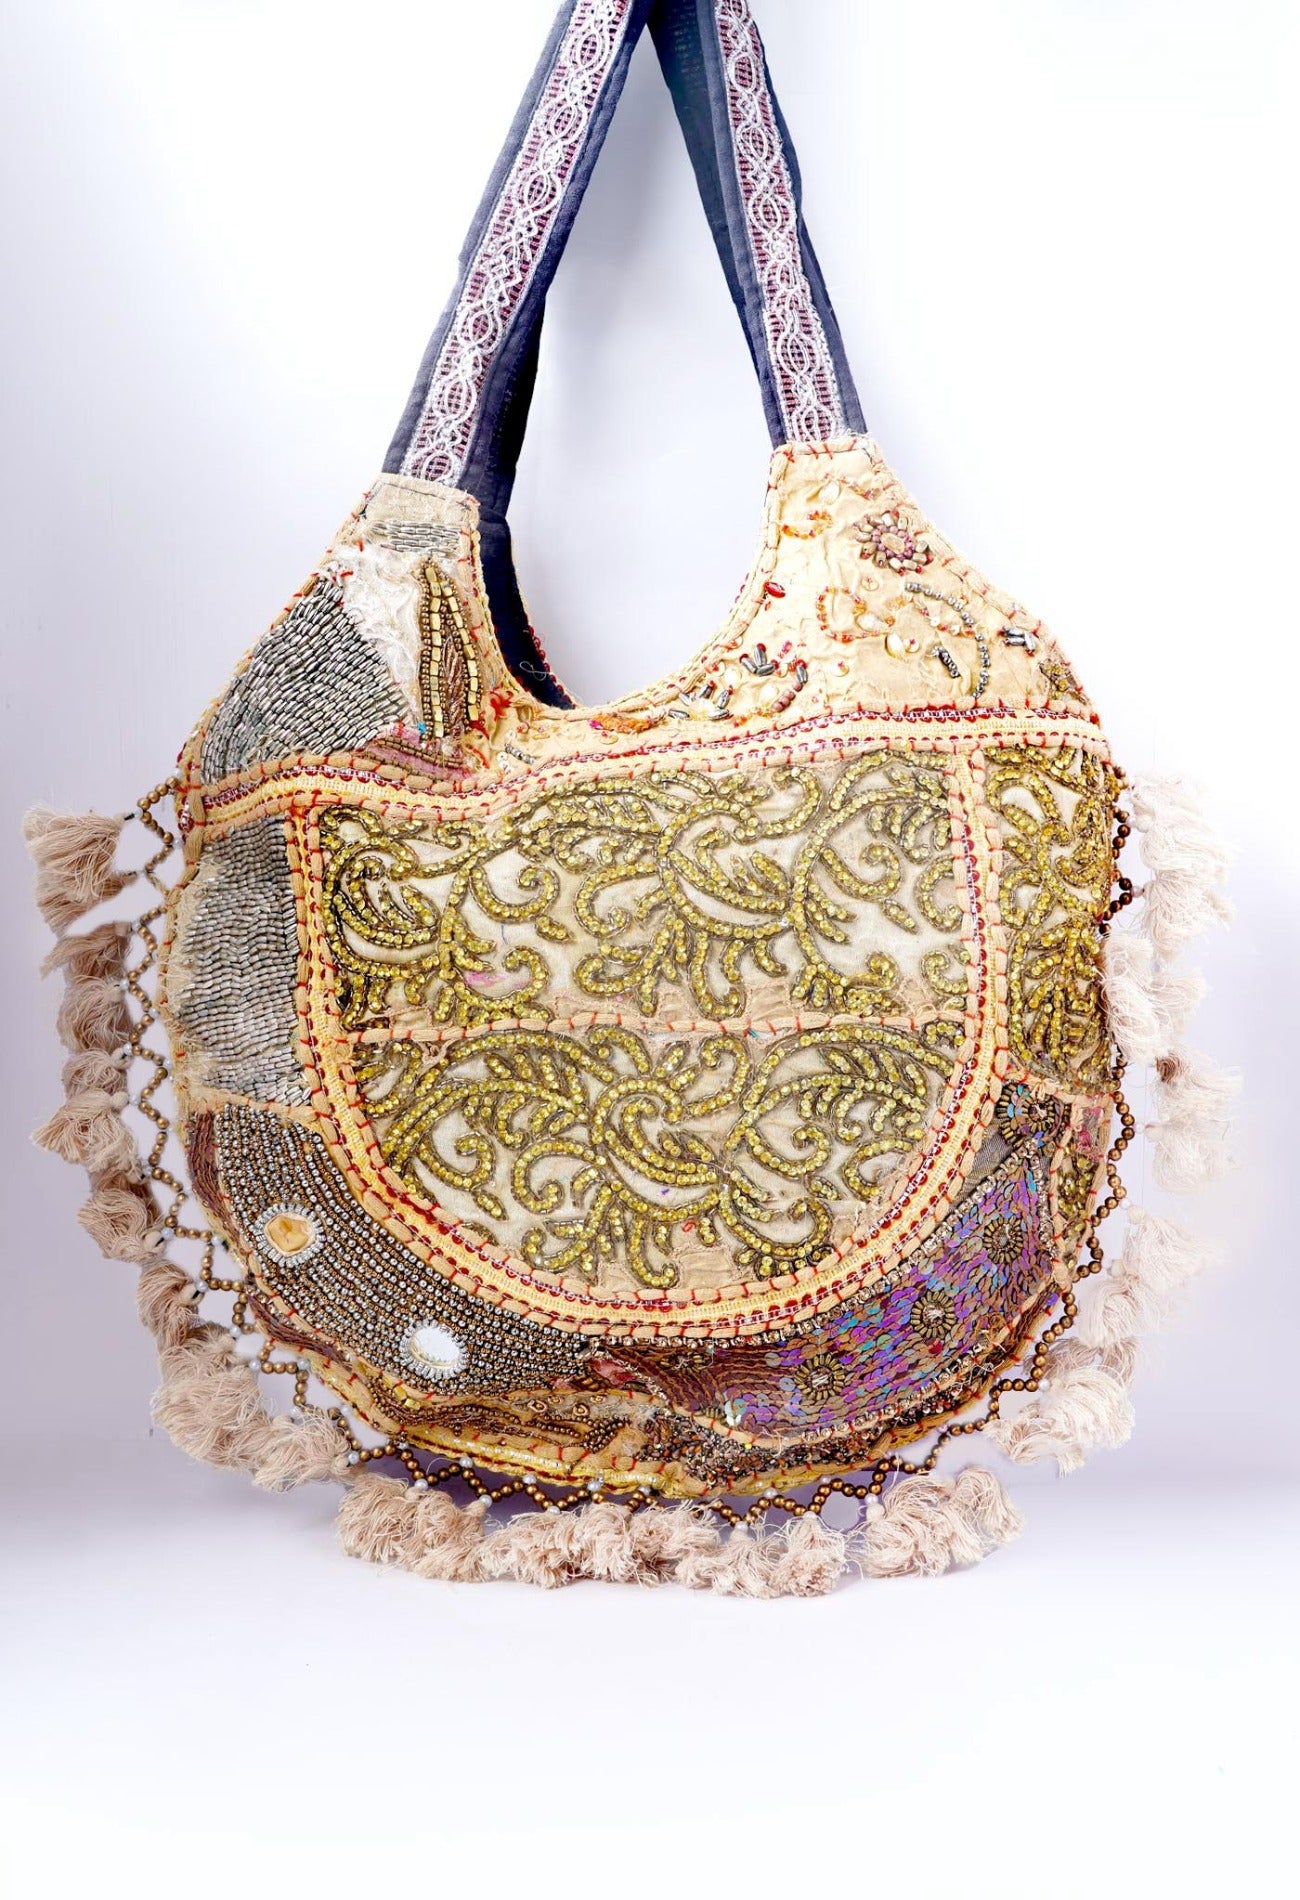 Online Shopping for Ivory Indian Handicraft Embroidered Hand Bag with Weaving from Rajasthan at Unnatisilks.com India_x000D_
Online Shopping for Ivory Indian Handicraft Embroidered Hand Bag with Weaving from Rajasthan at Unnatisilks.com India_x000D_
Online Shopping for Ivory Indian Handicraft Embroidered Hand Bag with Weaving from Rajasthan at Unnatisilks.com India_x000D_
Online Shopping for Ivory Indian Handicraft Embroidered Hand Bag with Weaving from Rajasthan at Unnatisilks.com India_x000D_
